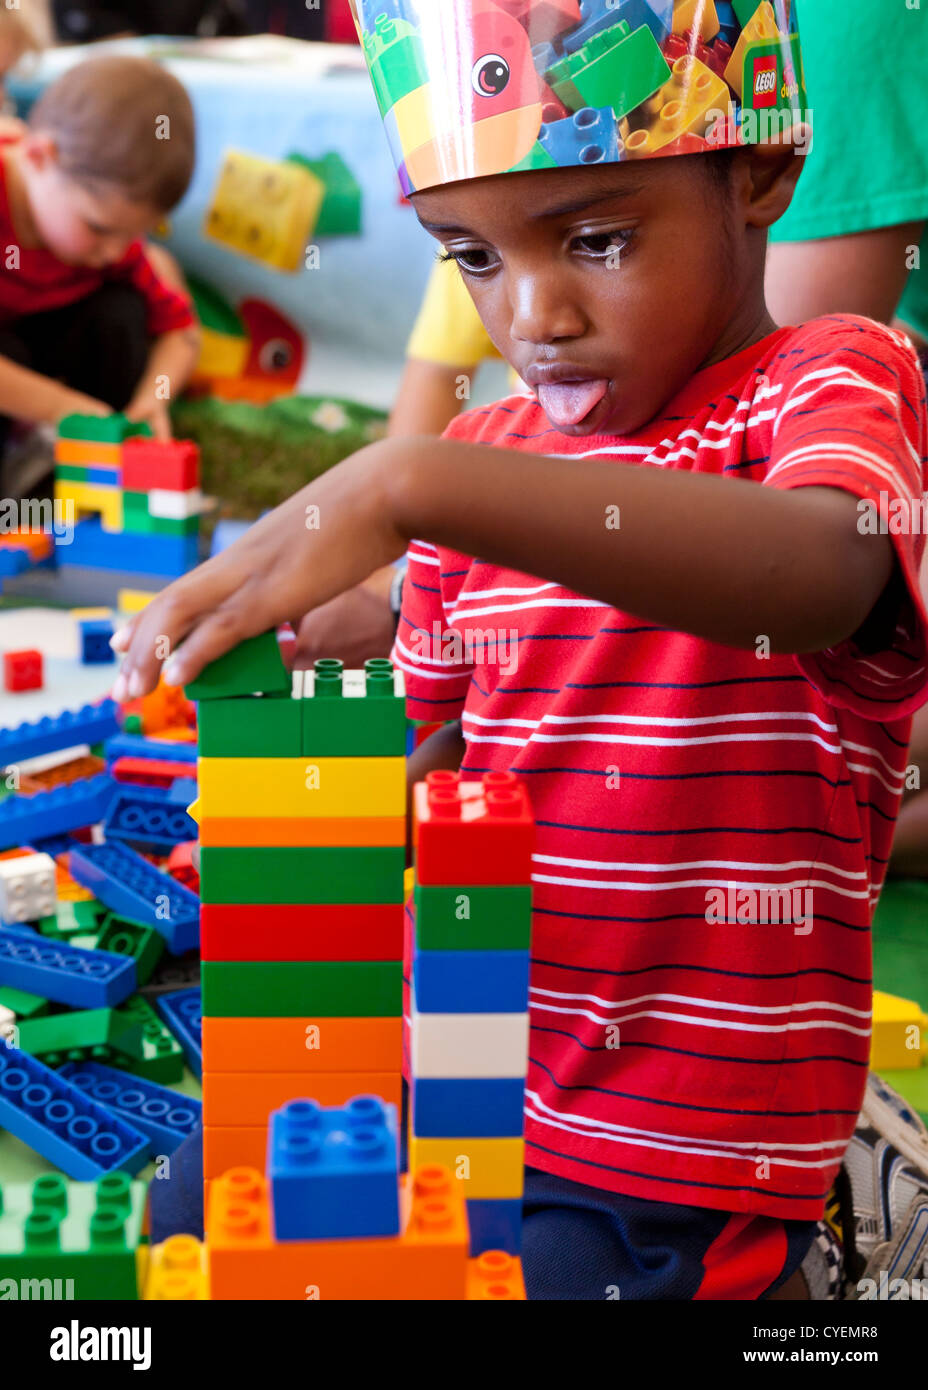 African-American boy playing with Lego bricks Stock Photo - Alamy